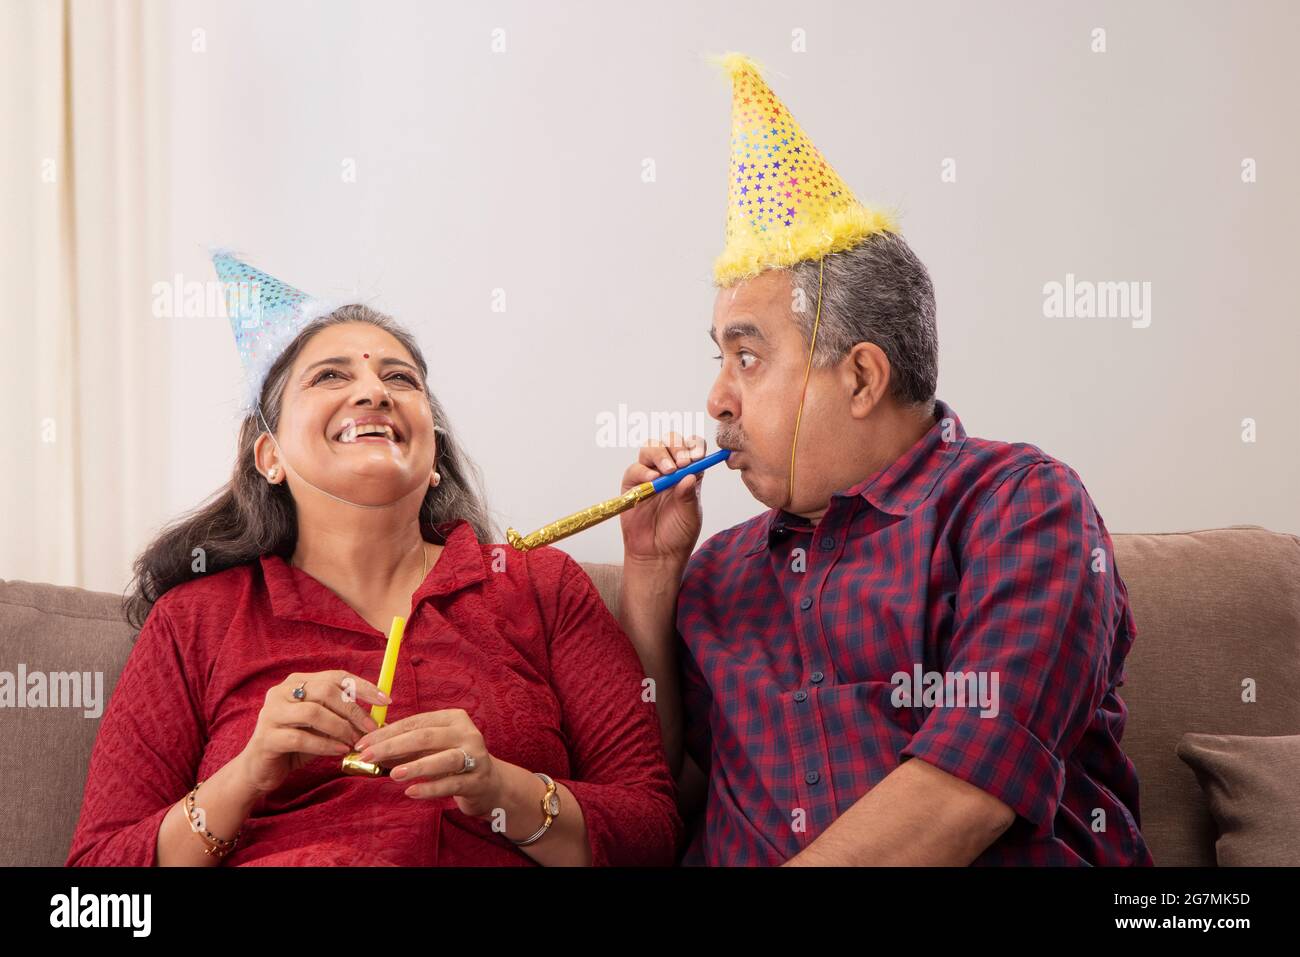 AN OLD MAN PLAYFULLY BLOWING TEASING WIFE WHILE CELEBRATING BIRTHDAY Stock Photo